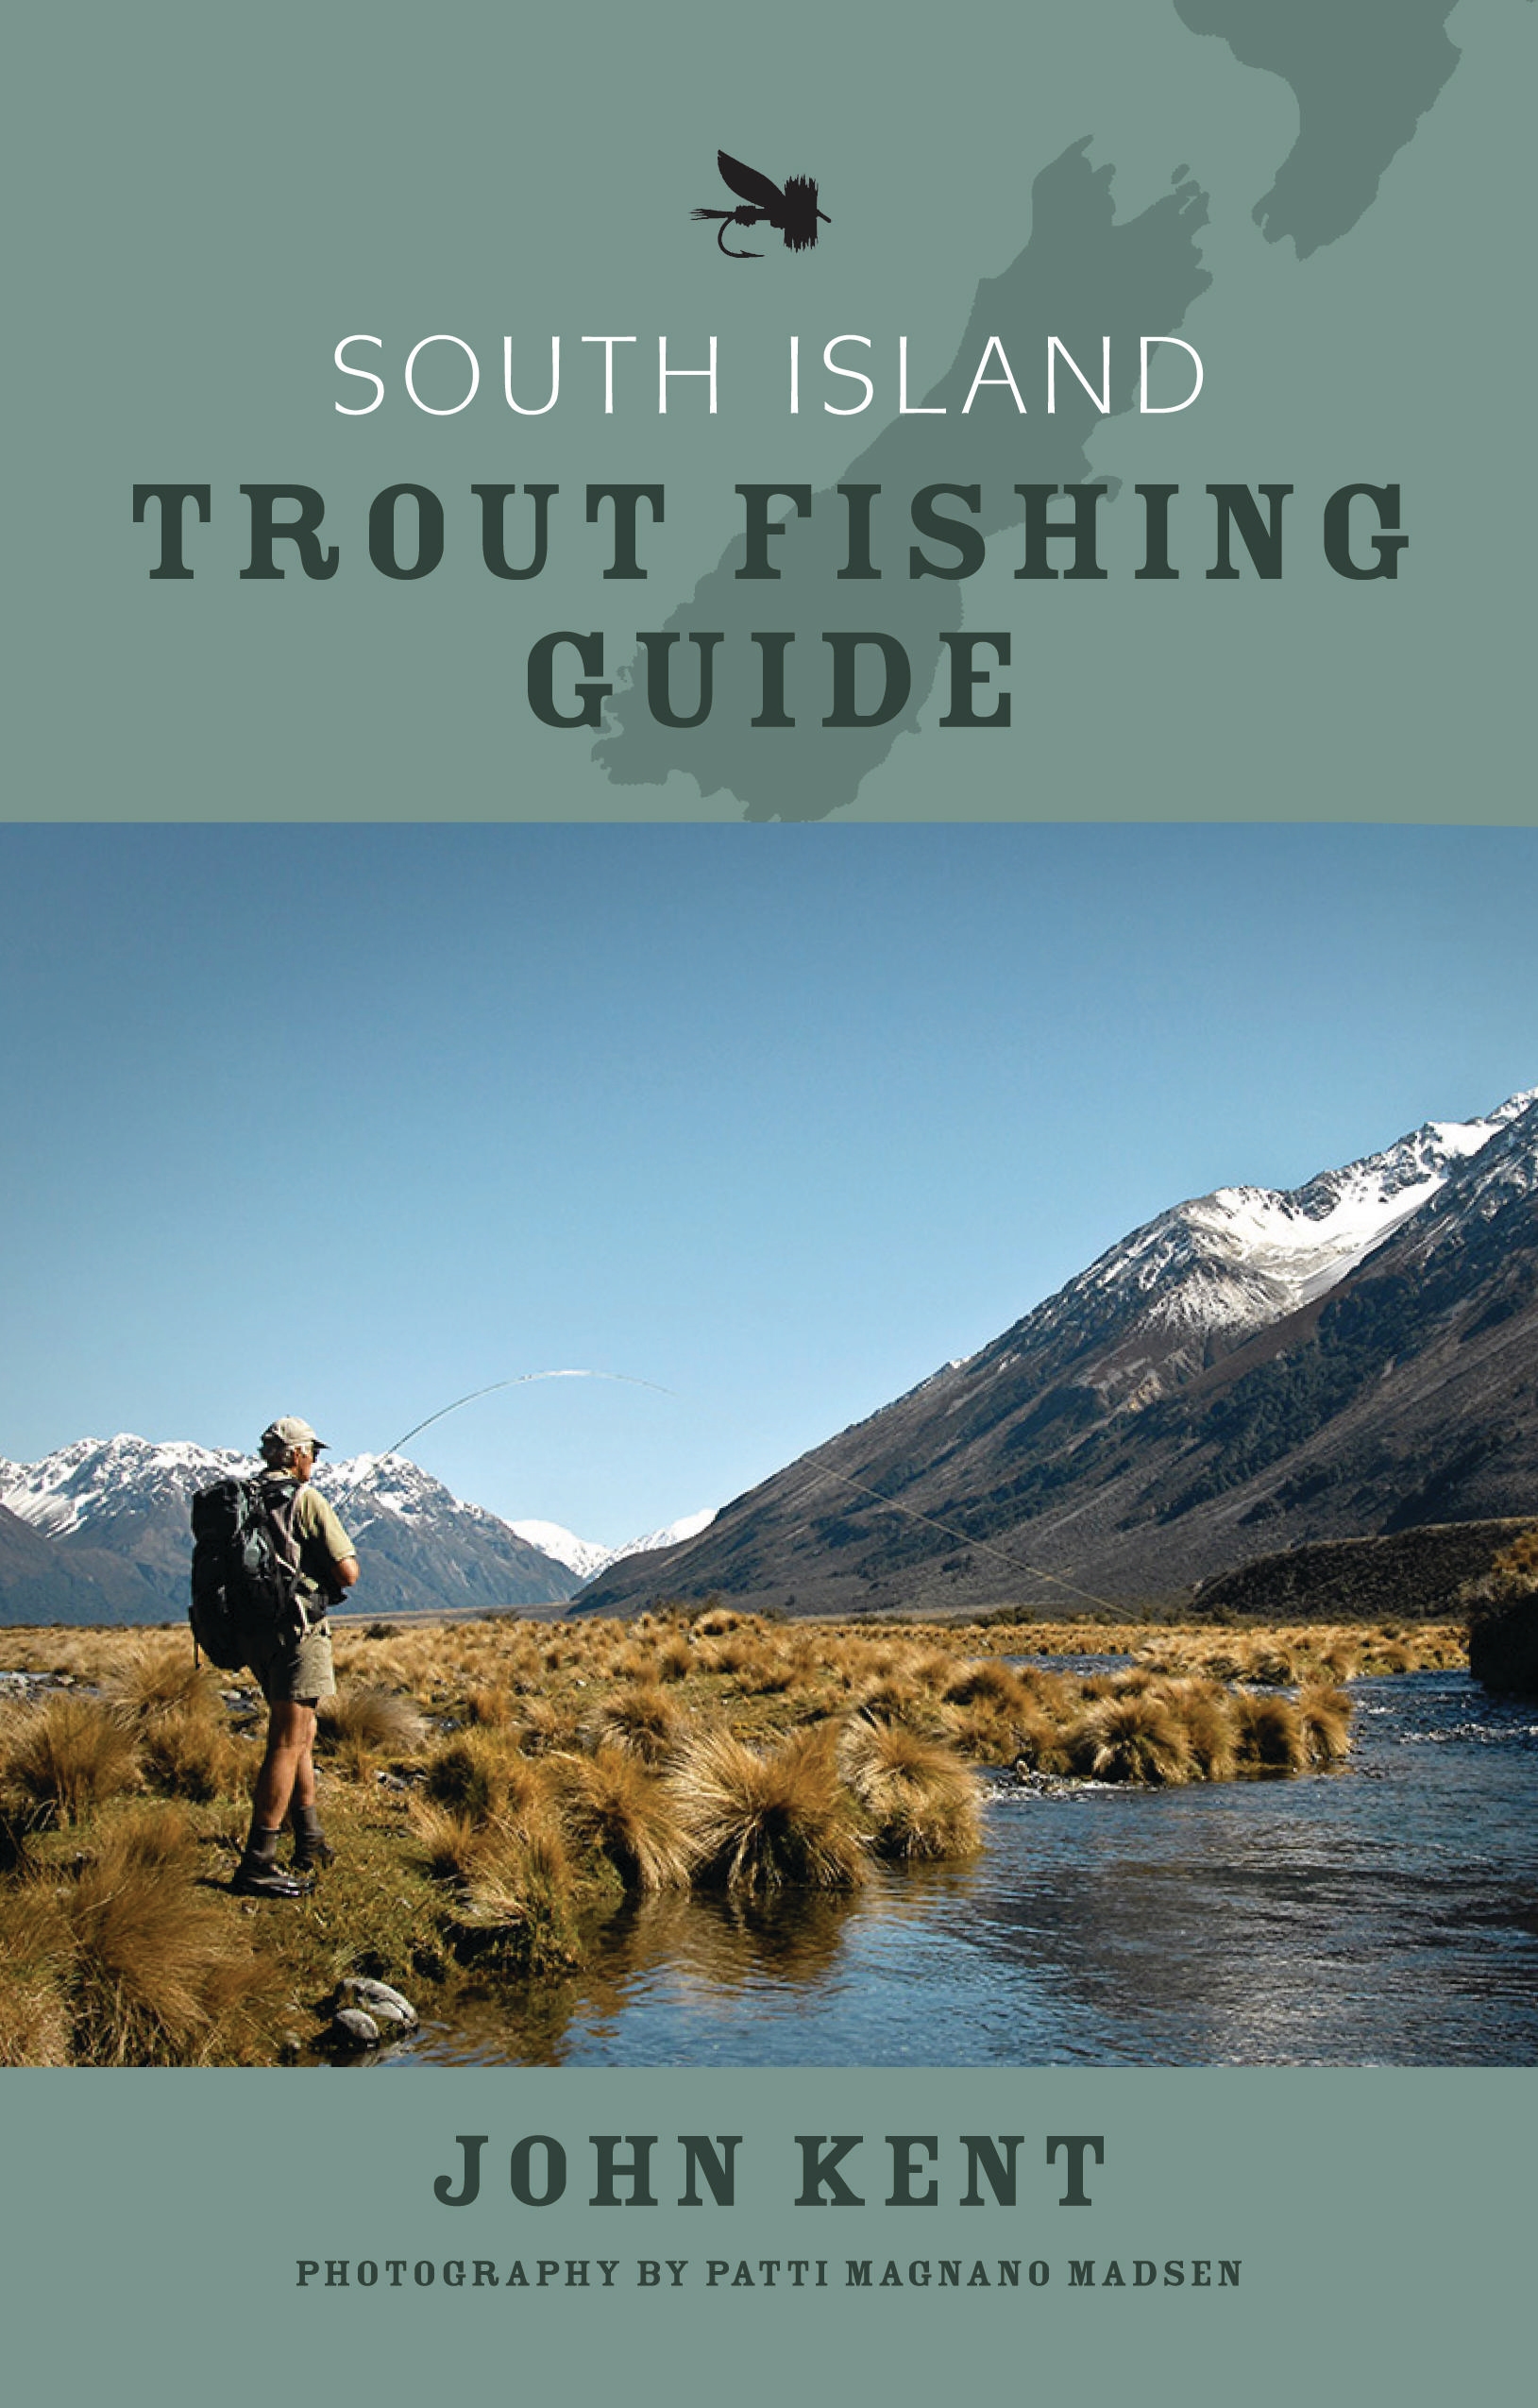 South Island Trout Fishing Guide by John Kent - Penguin Books New Zealand